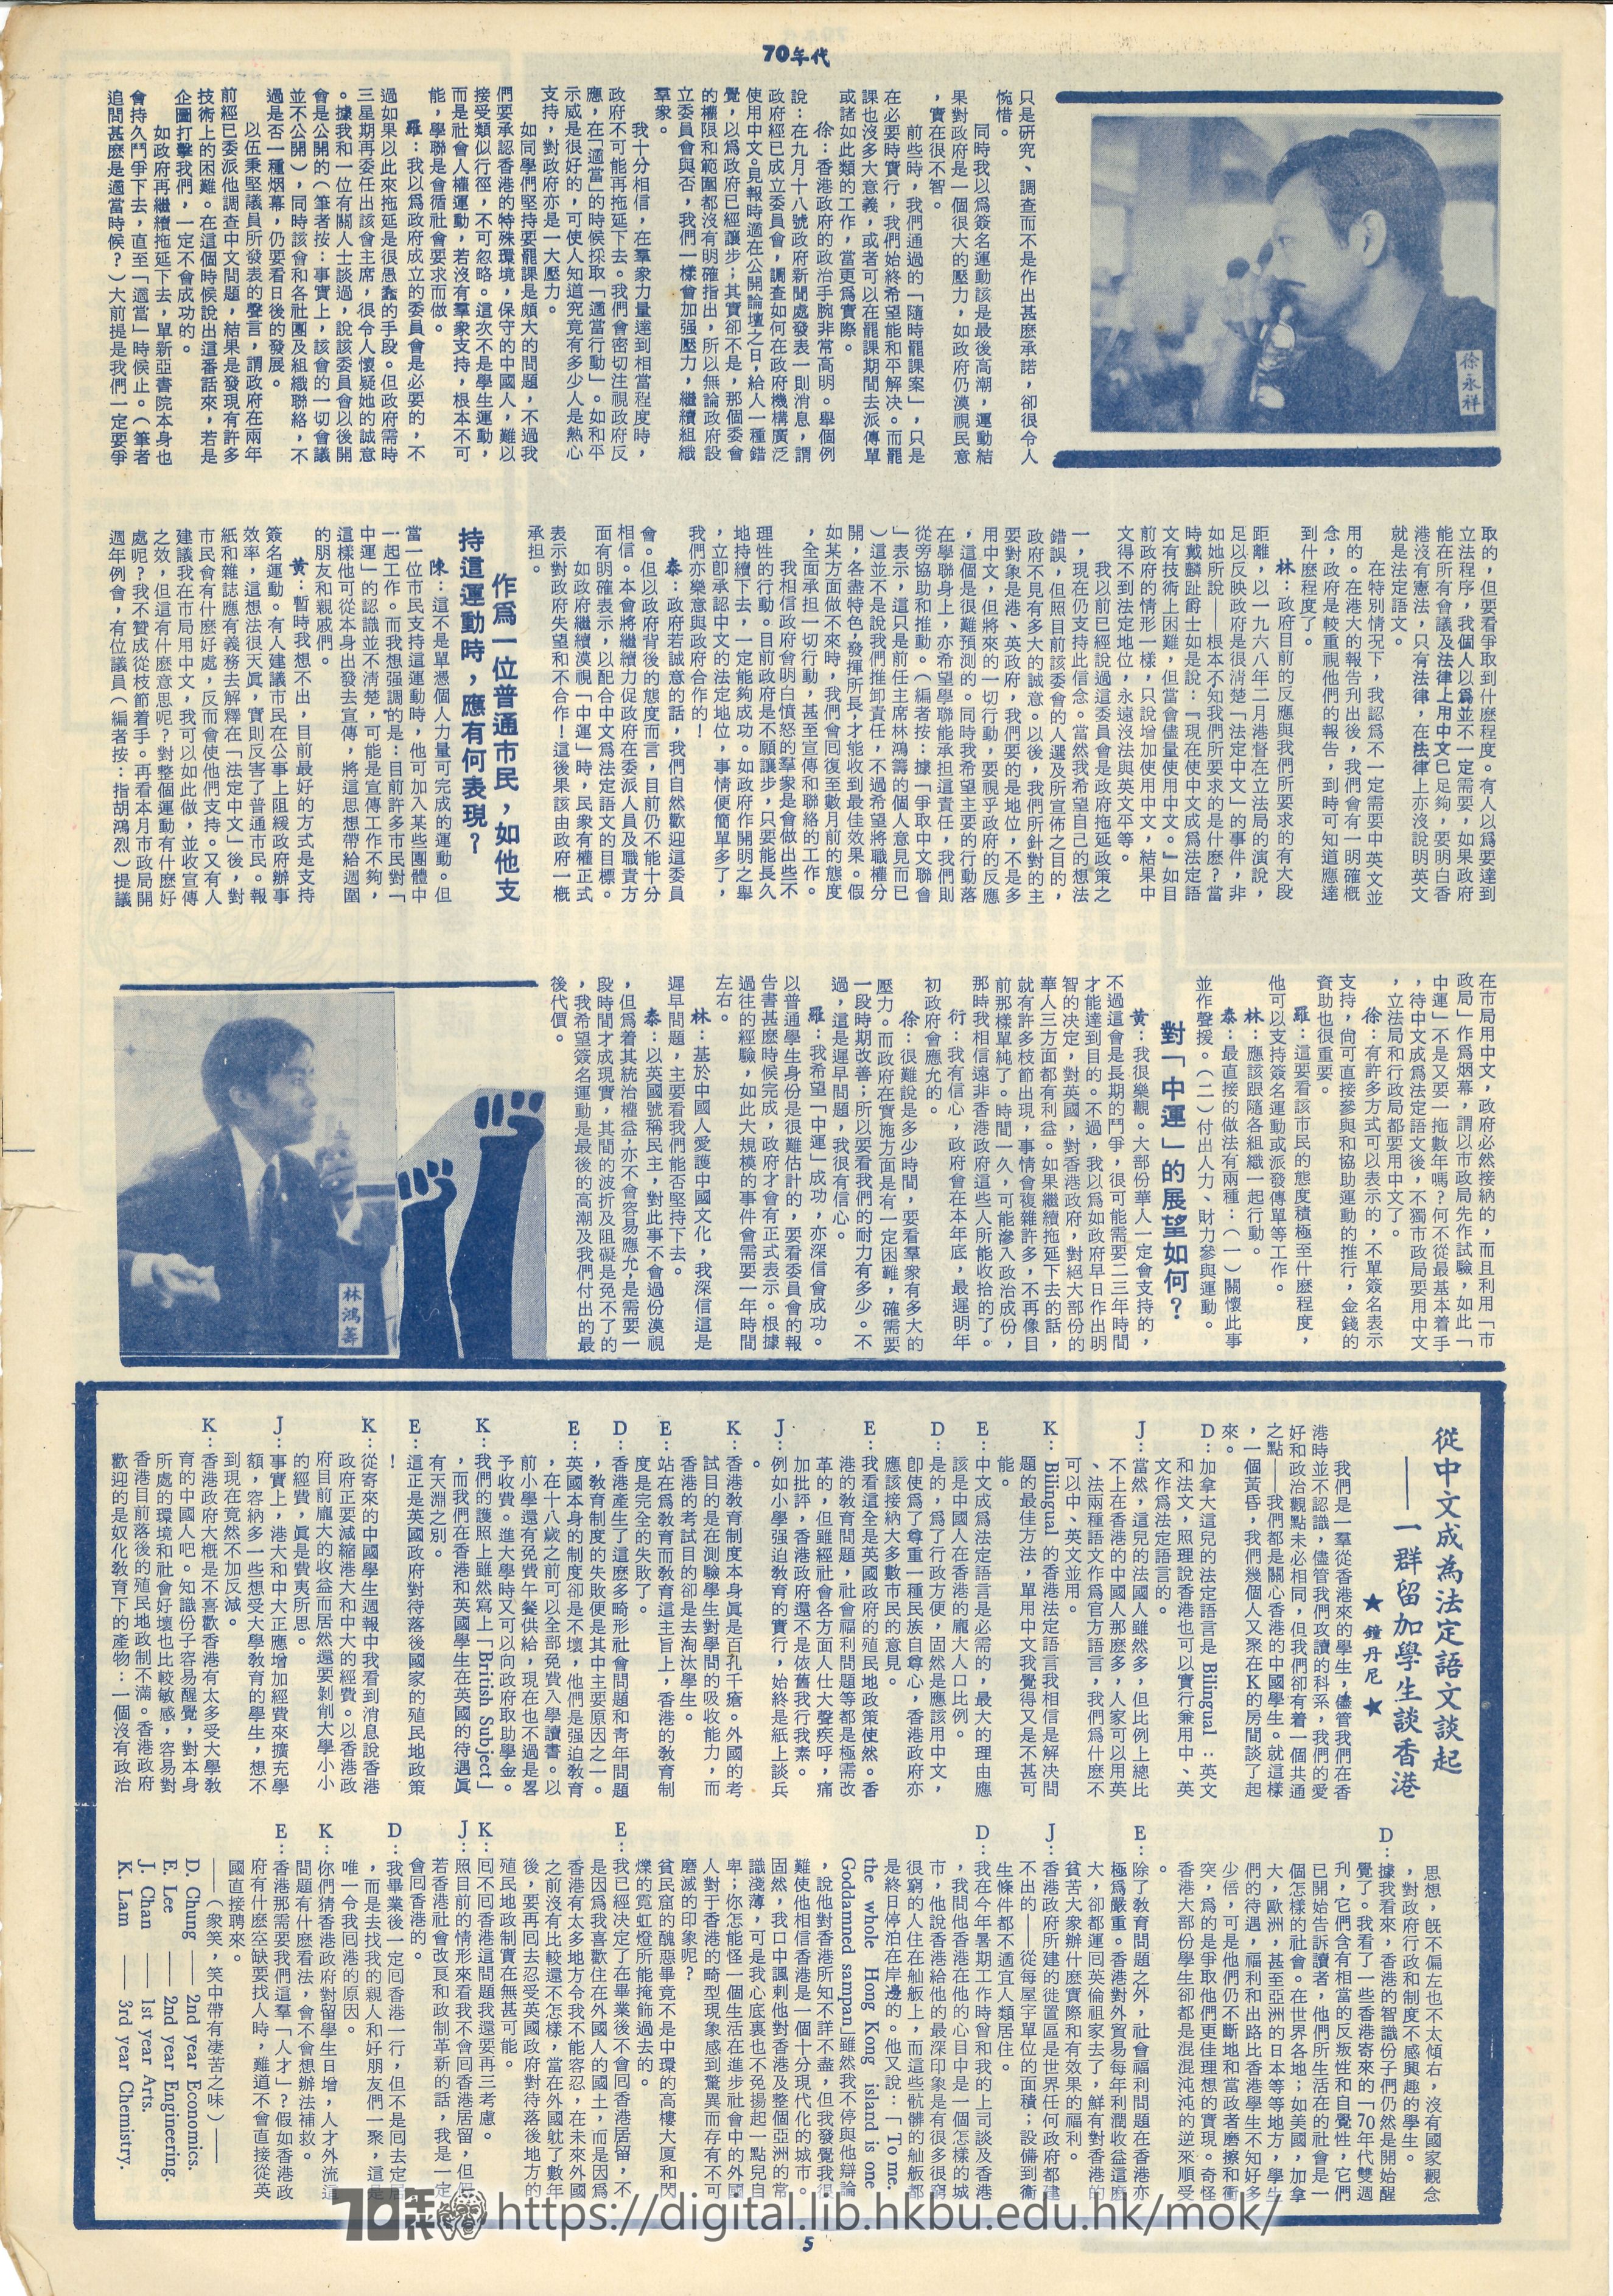  16 On-going Chinese Langauge Movement - interview with the action committee 訪問：鄭雲 